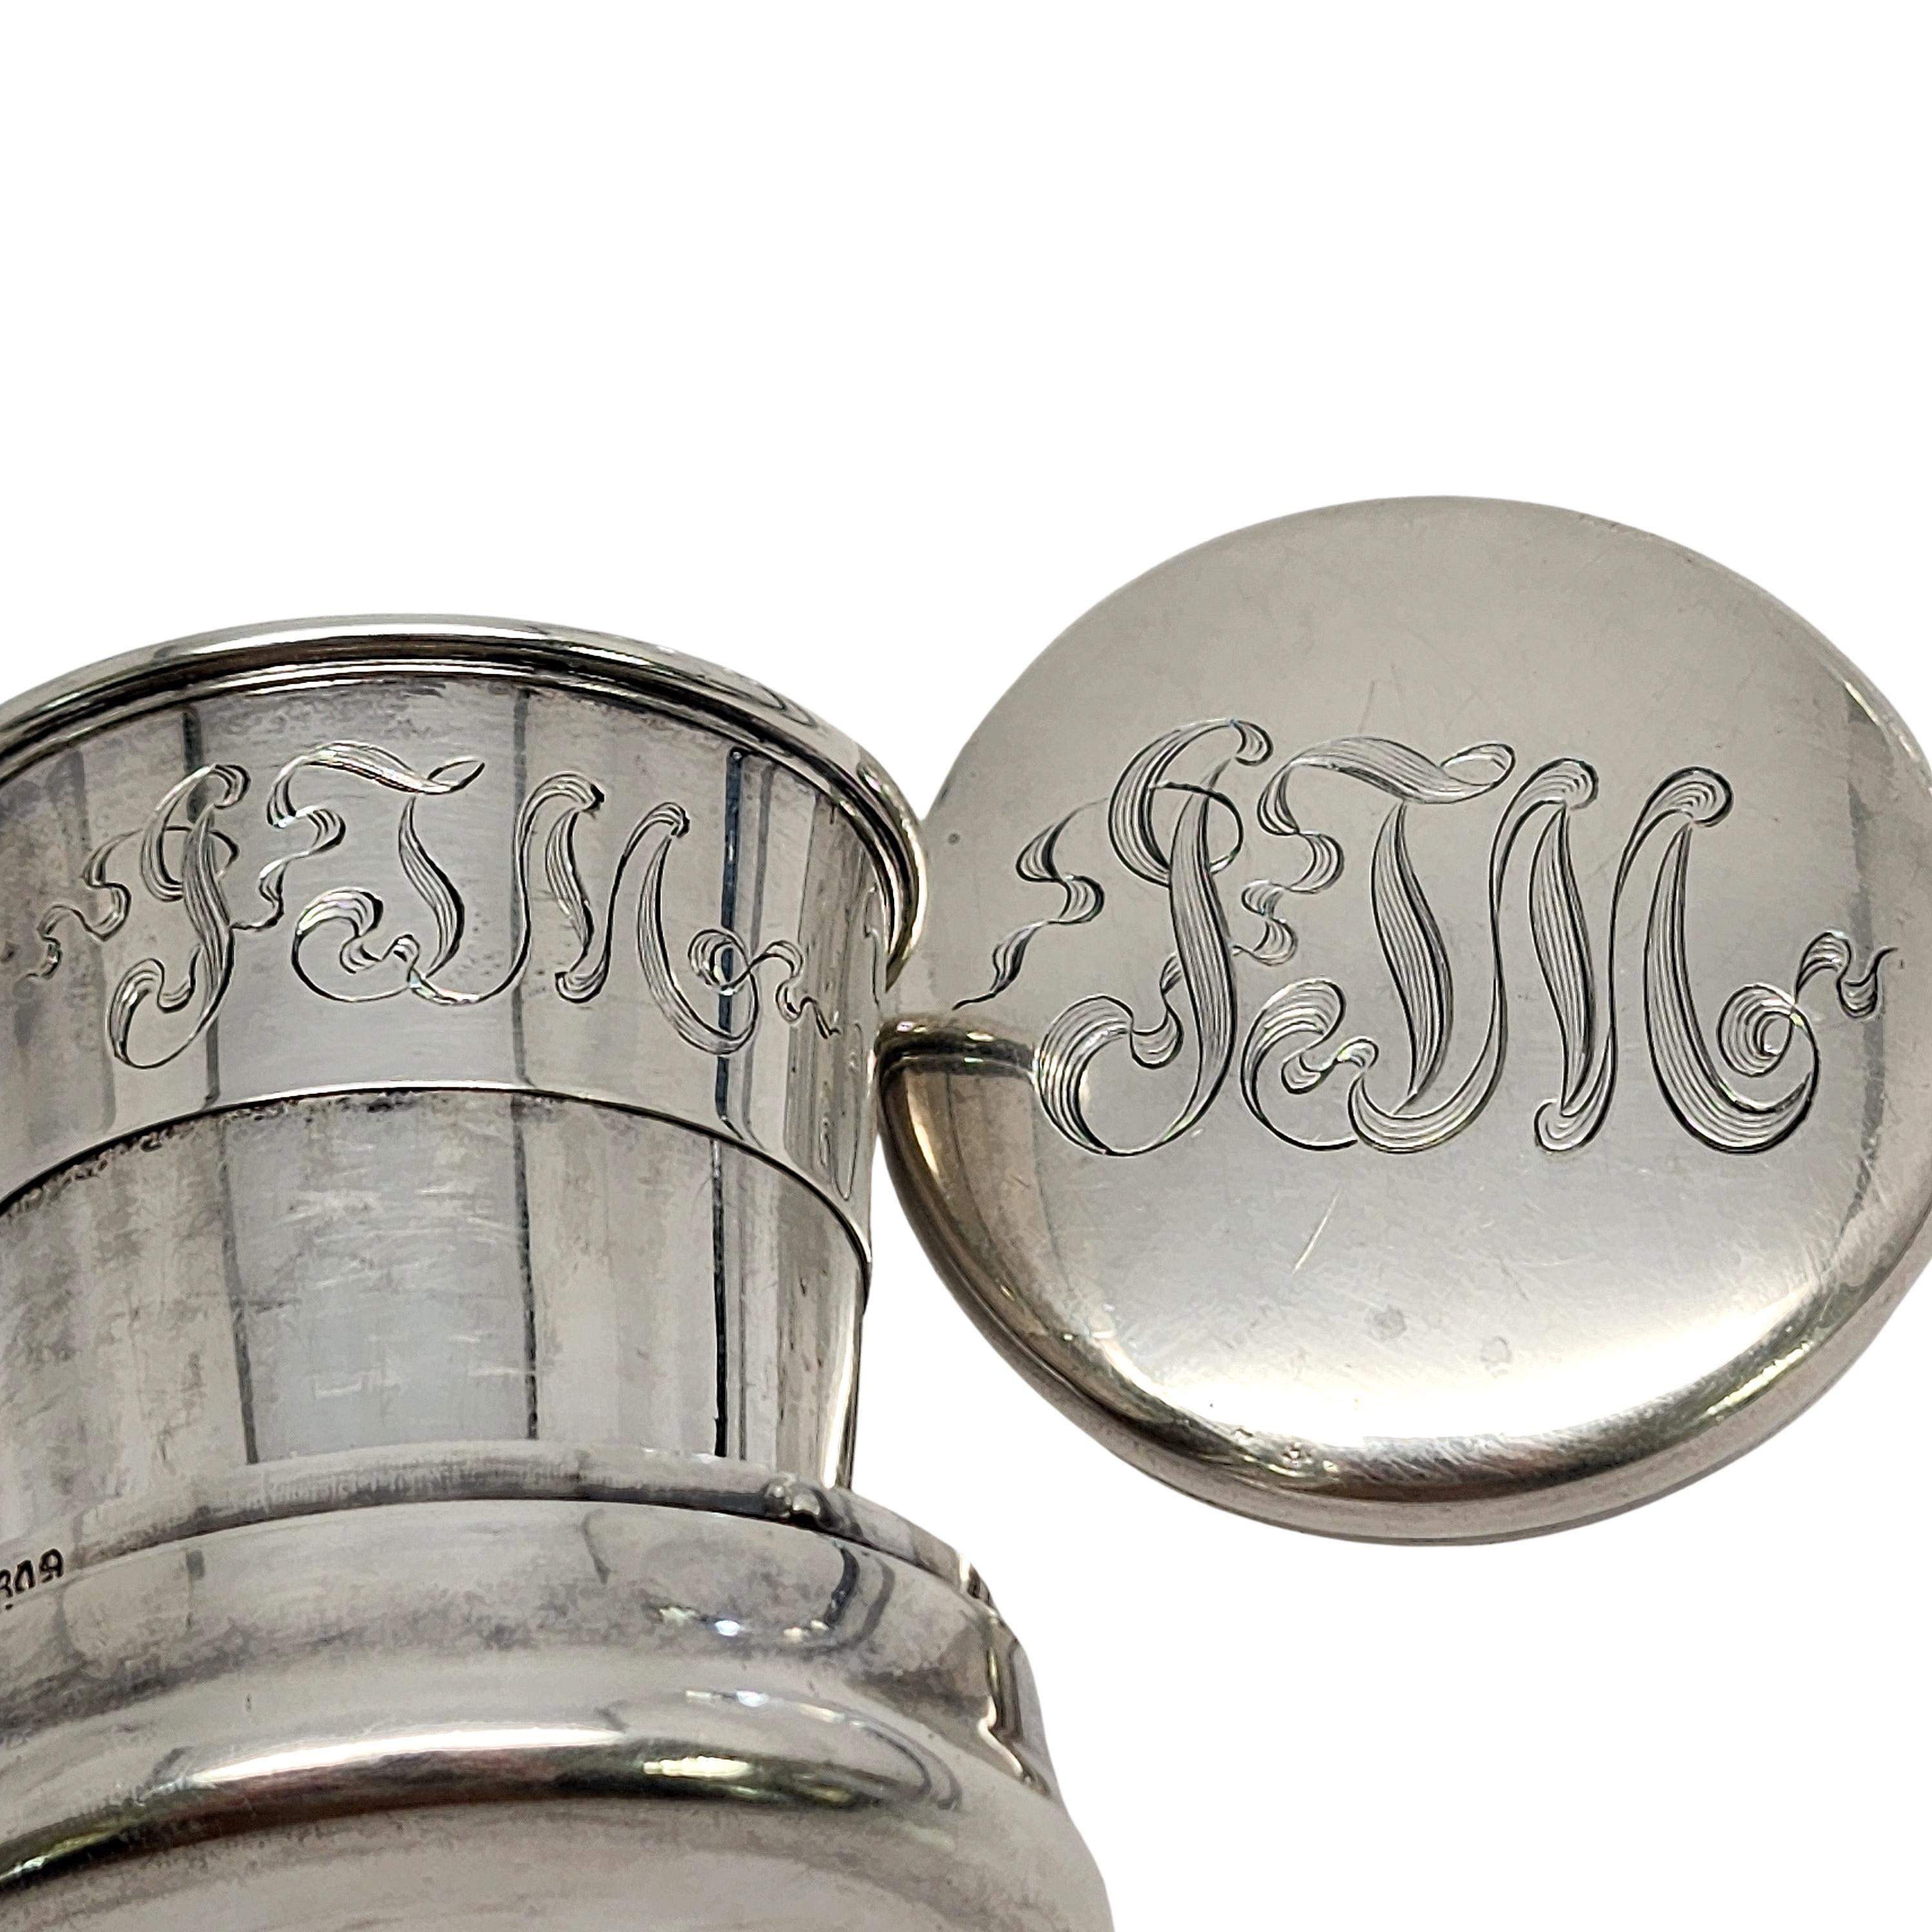 Sterling silver collapsible travel cup with gold wash interior by George W Shiebler with monograms.

Monogram appears to be JTM (on the lid and on the cup)

This travel cup features a telescoping design that collapses into itself with a monogrammed